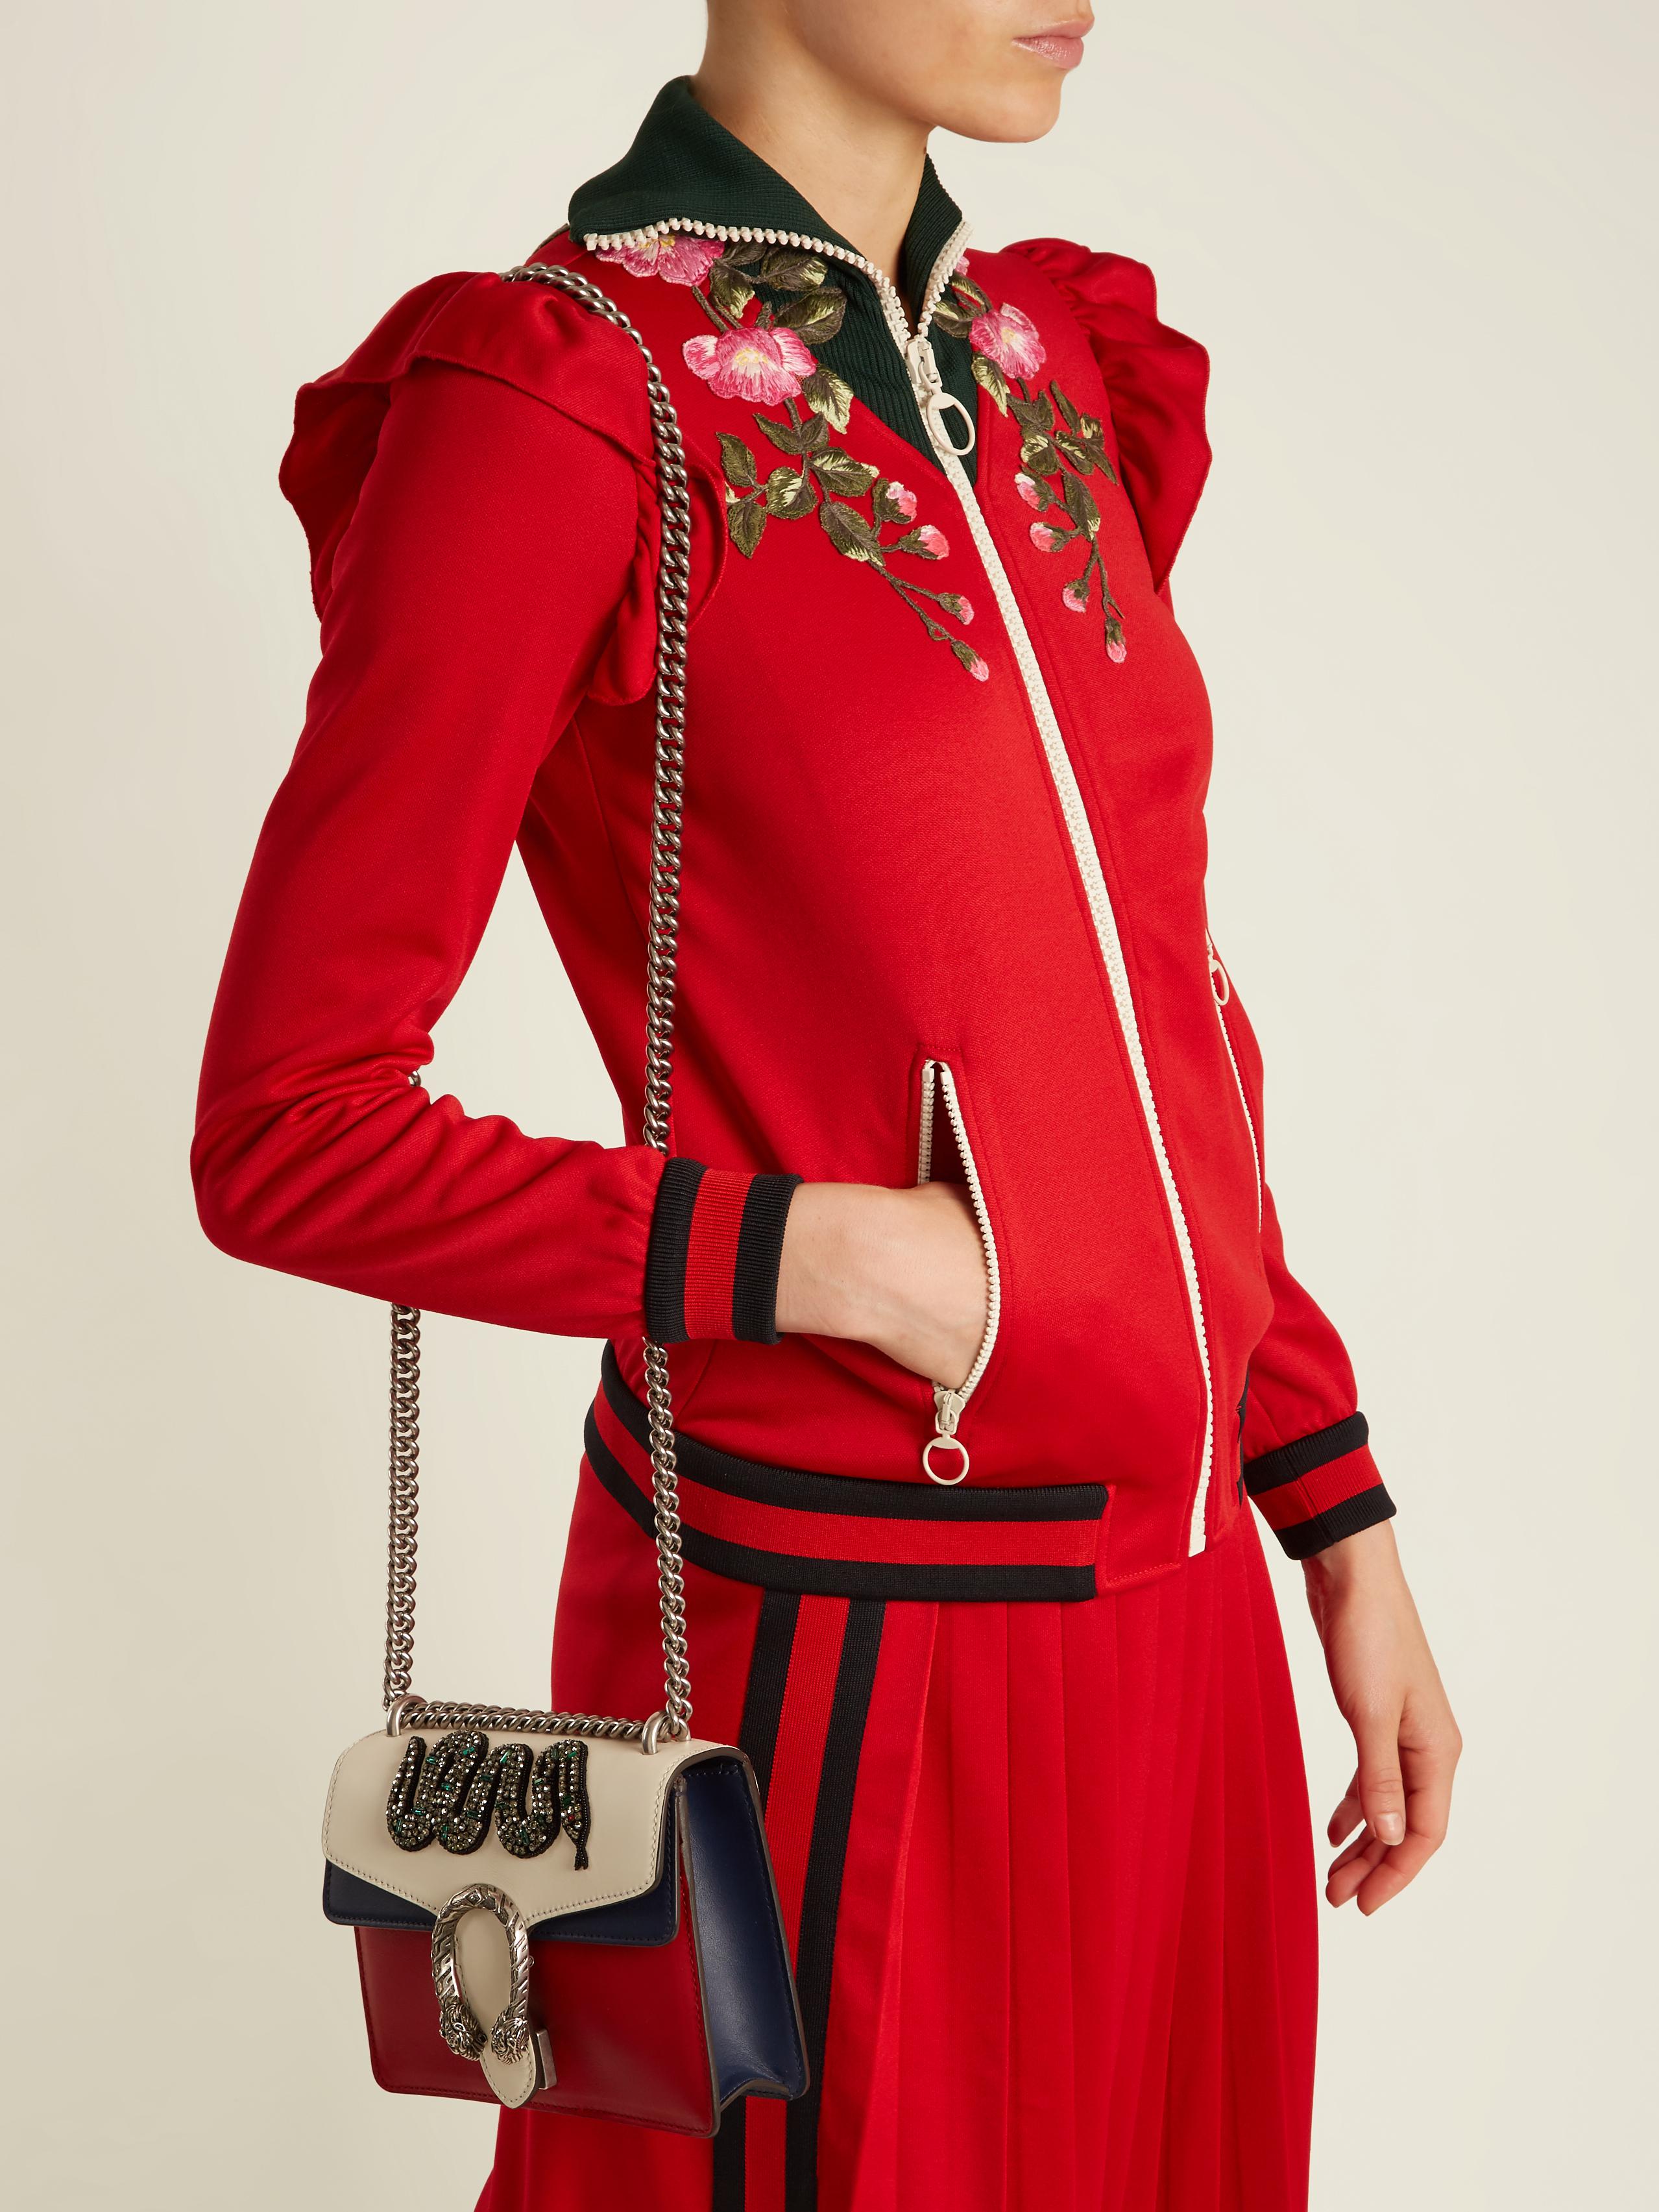 Lyst - Gucci Ruffled-shoulder Web-striped Jersey Jacket in Red